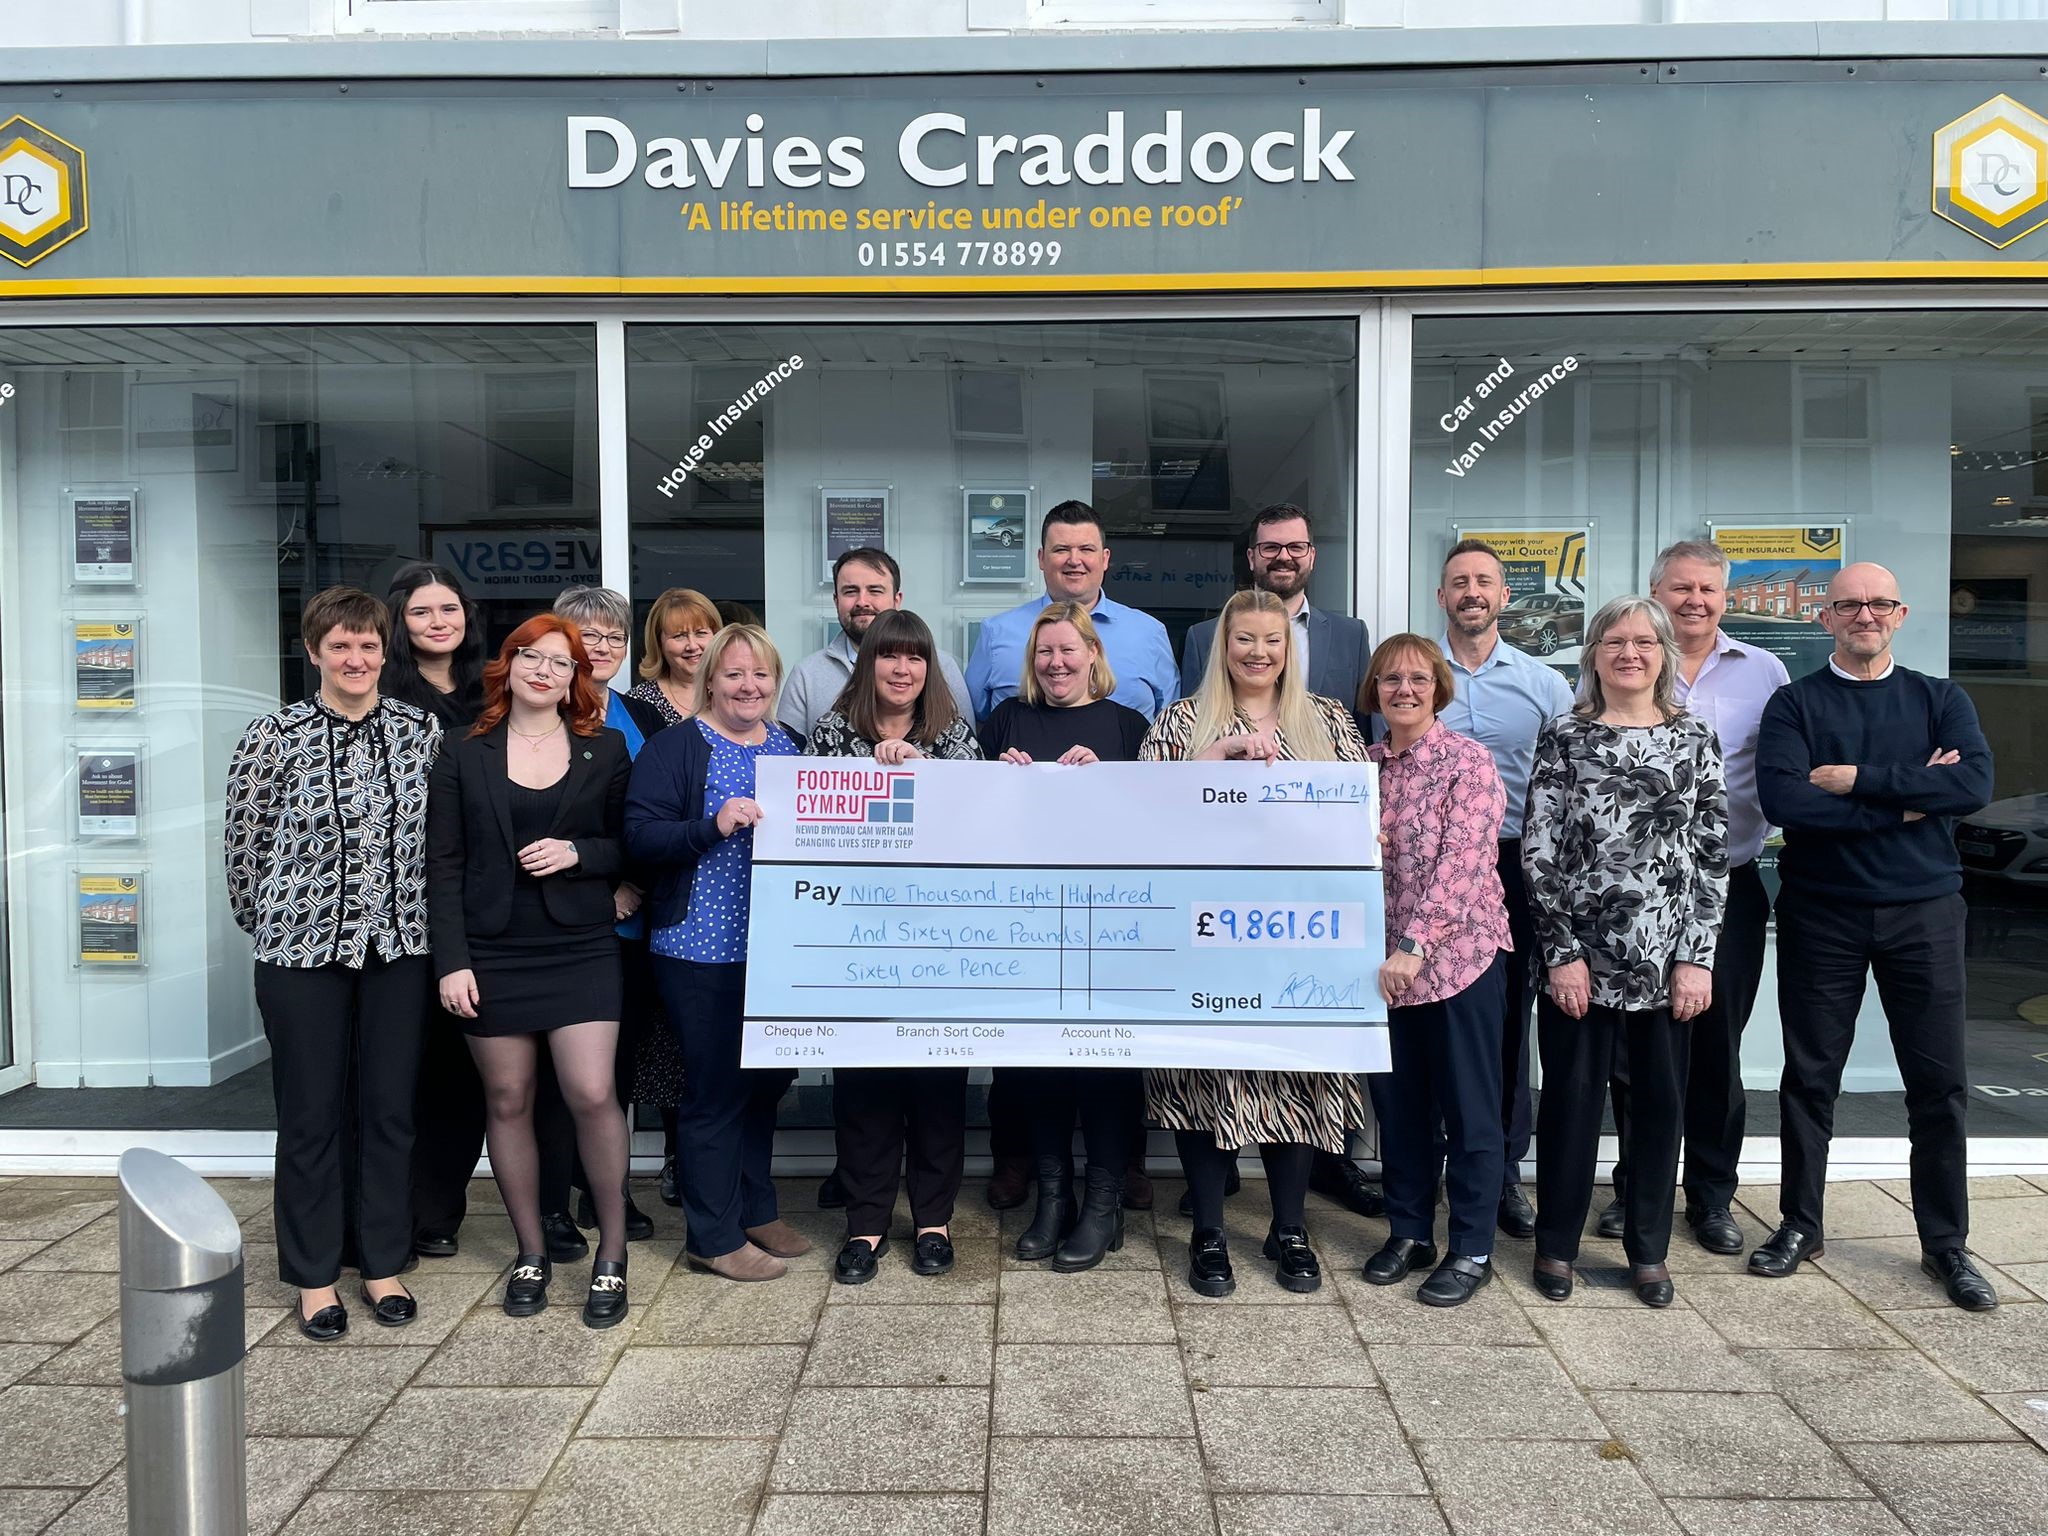 Llanelli based Davies Craddock Insurance donates over nine thousand pounds to local charity Foothold Cymru!